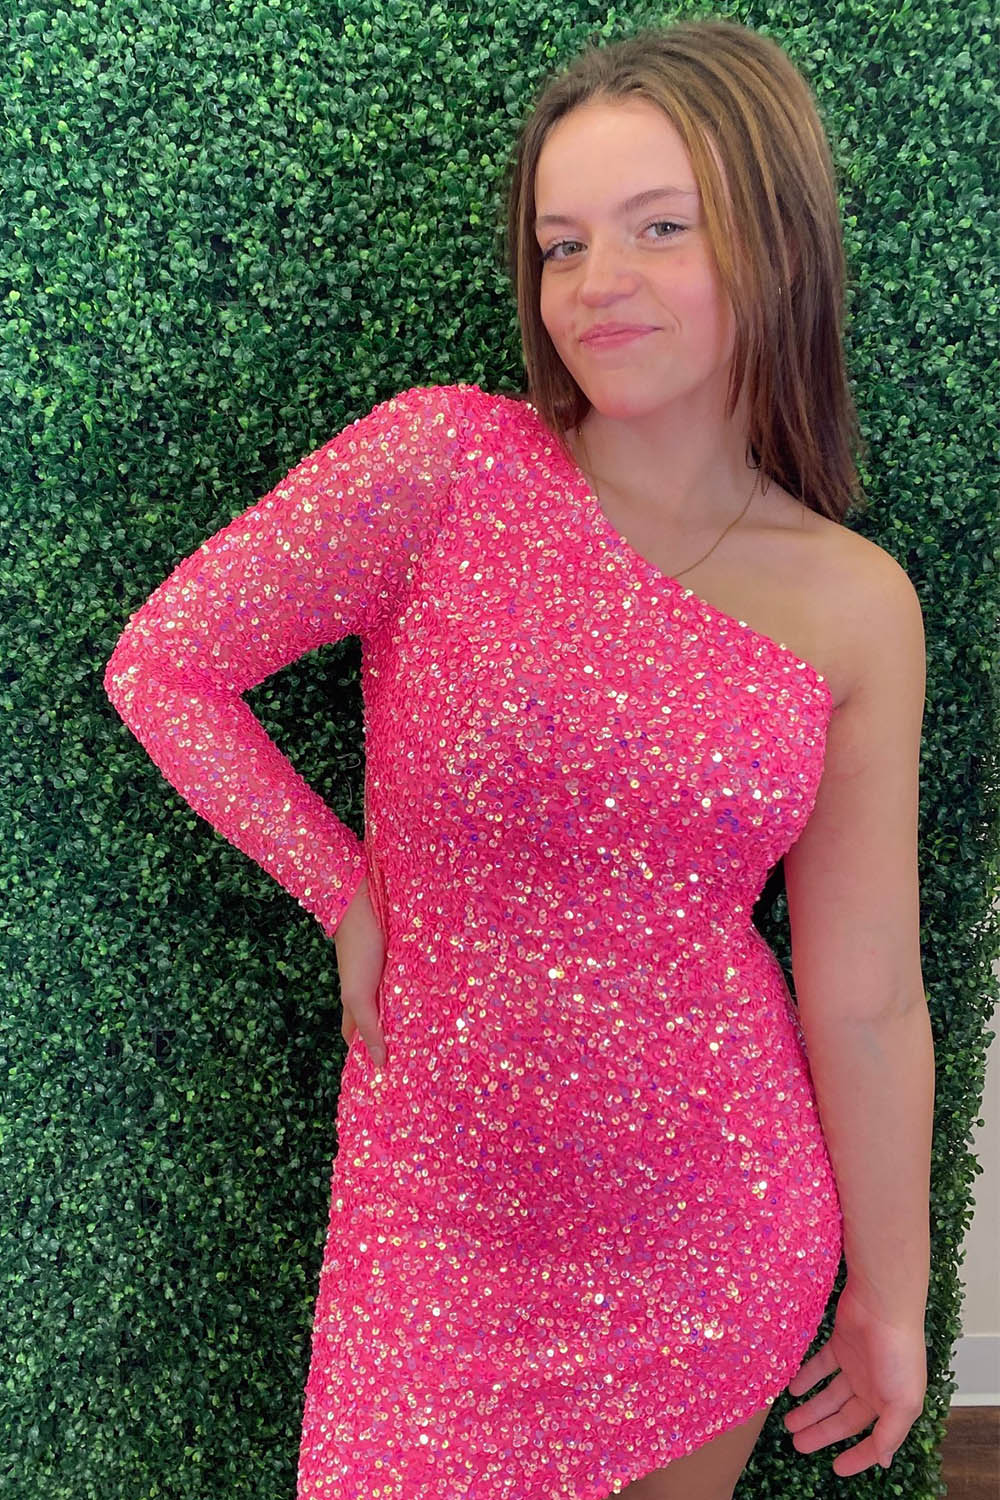 Sparkly Hot Pink One Shoulder Tight Sequins Homecoming Dress with Fringes